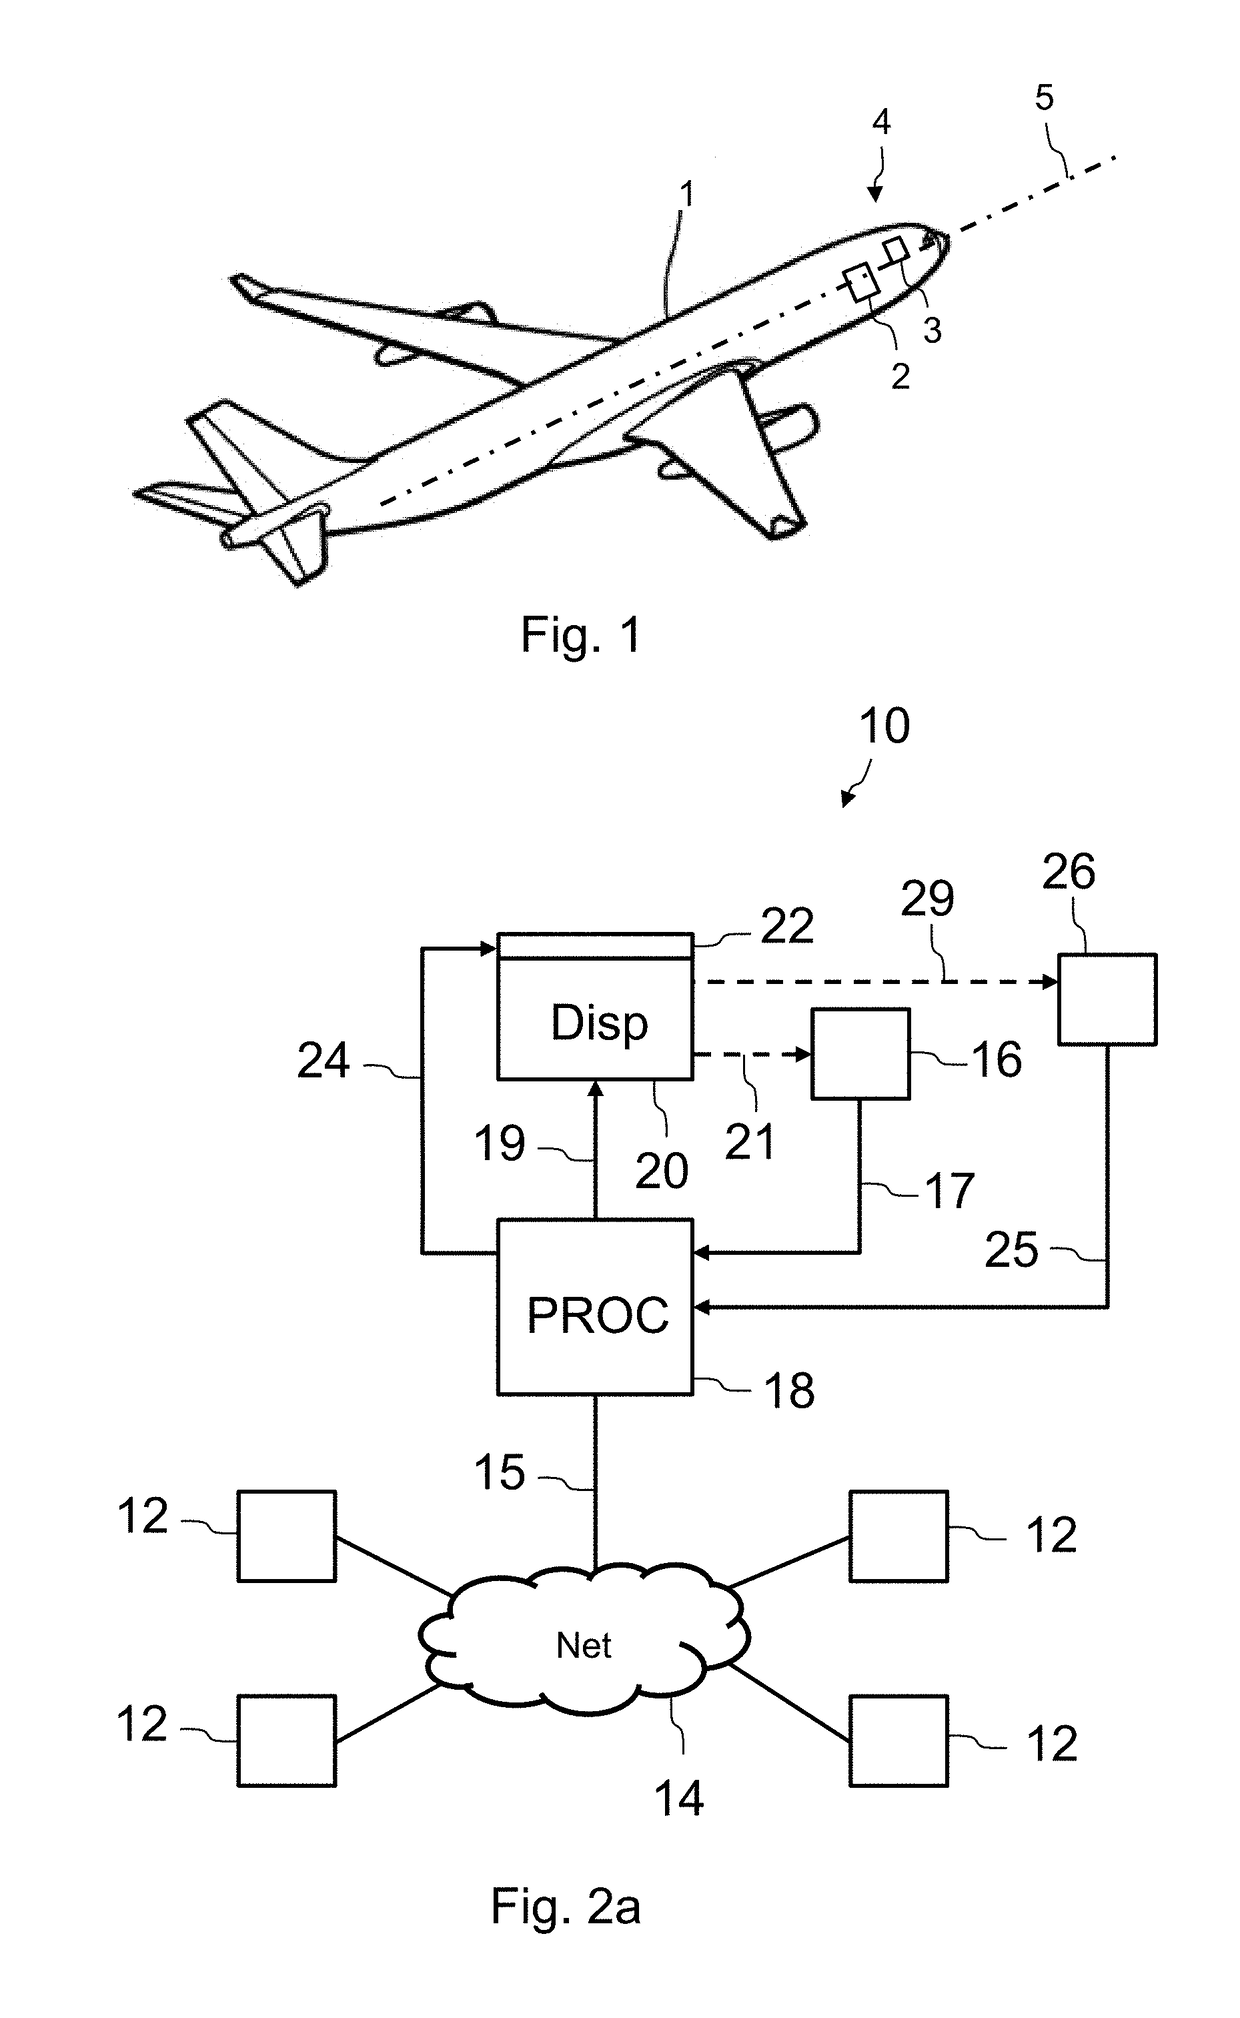 Display system of an aircraft